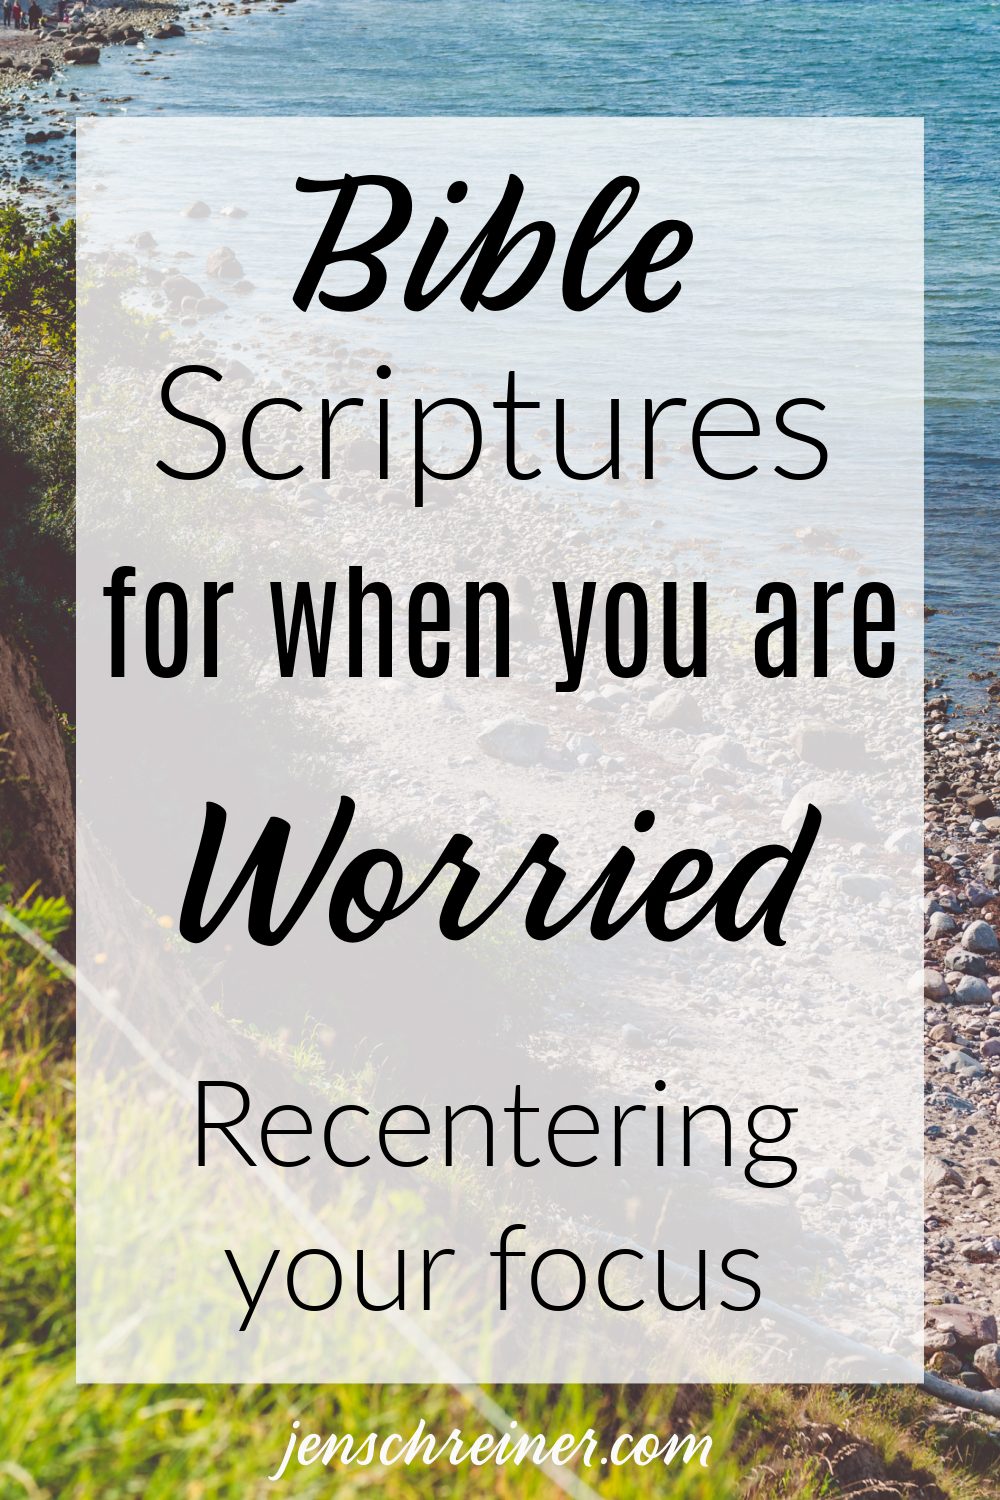 ocean beach background with text overlay - "Bible Scriptures for when you are worried"